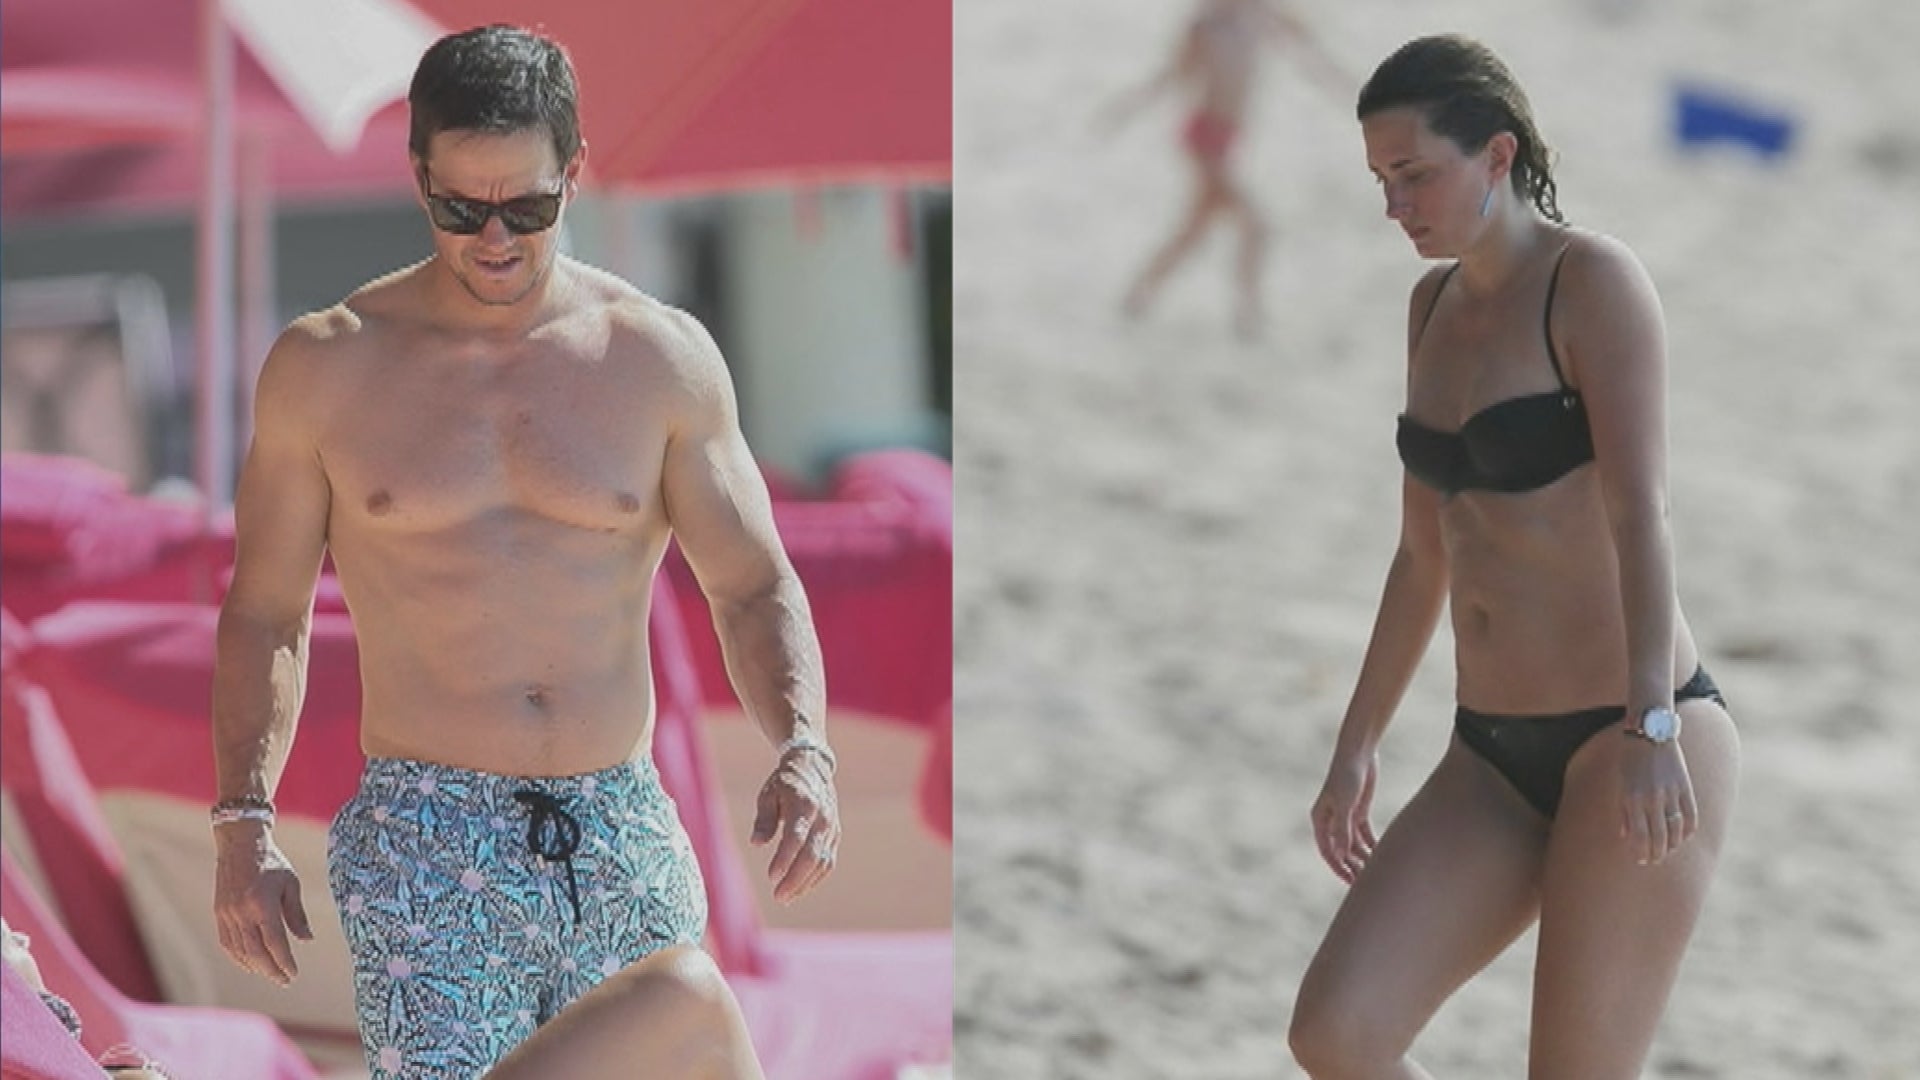 Mark Wahlberg Wife Image & Photo (Free Trial)